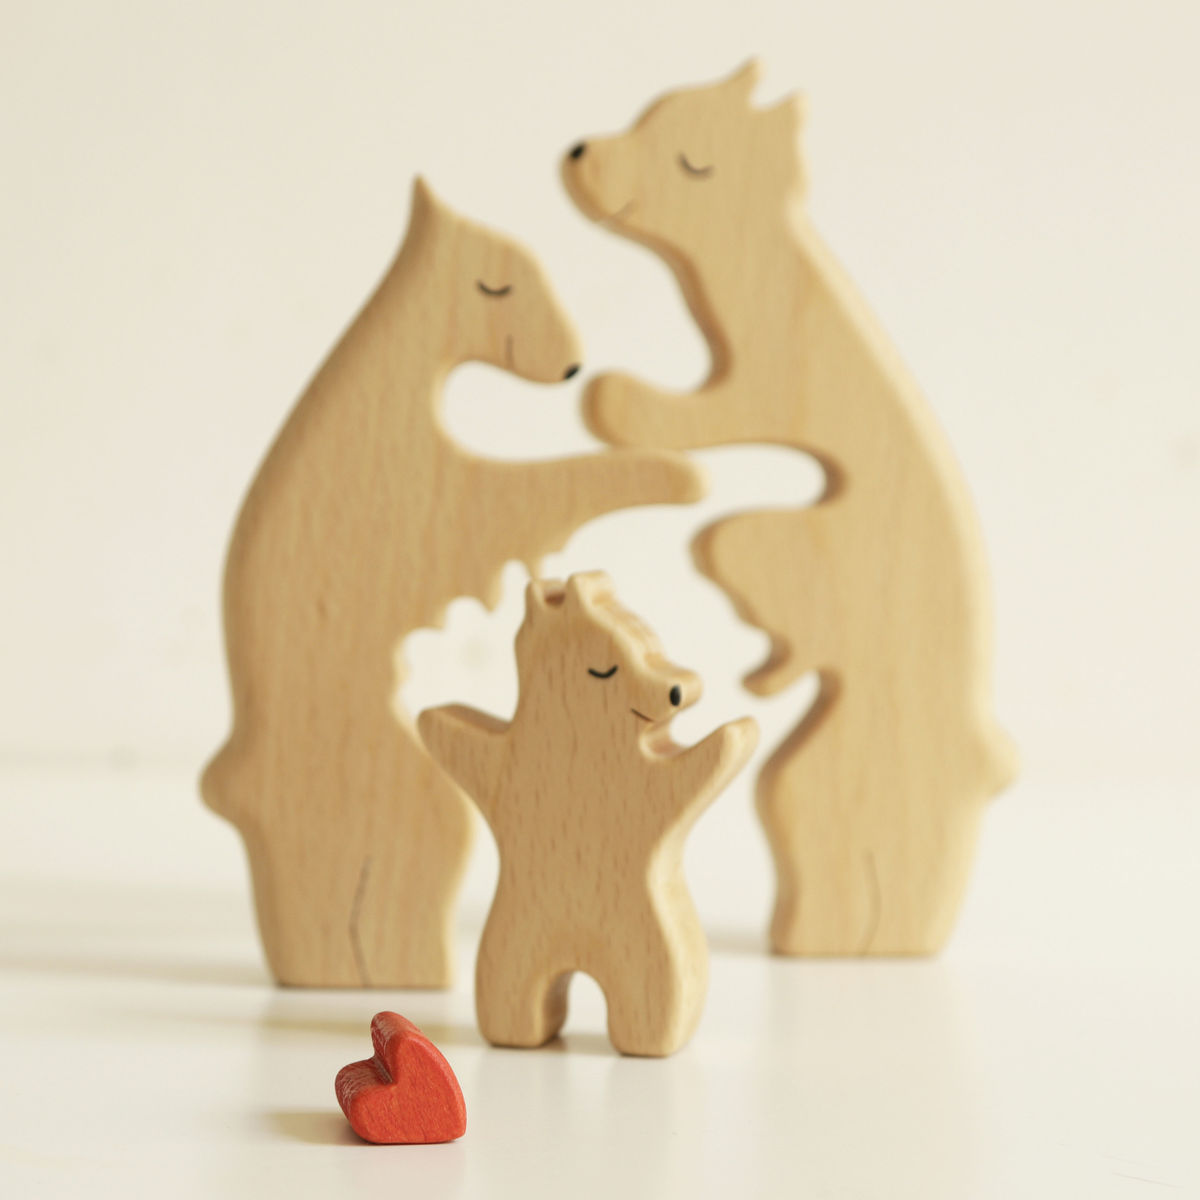 Wooden Bears family puzzle - Up to 6 Kids - Christmas Decor, Family Keepsake Gift, Home Decor_7